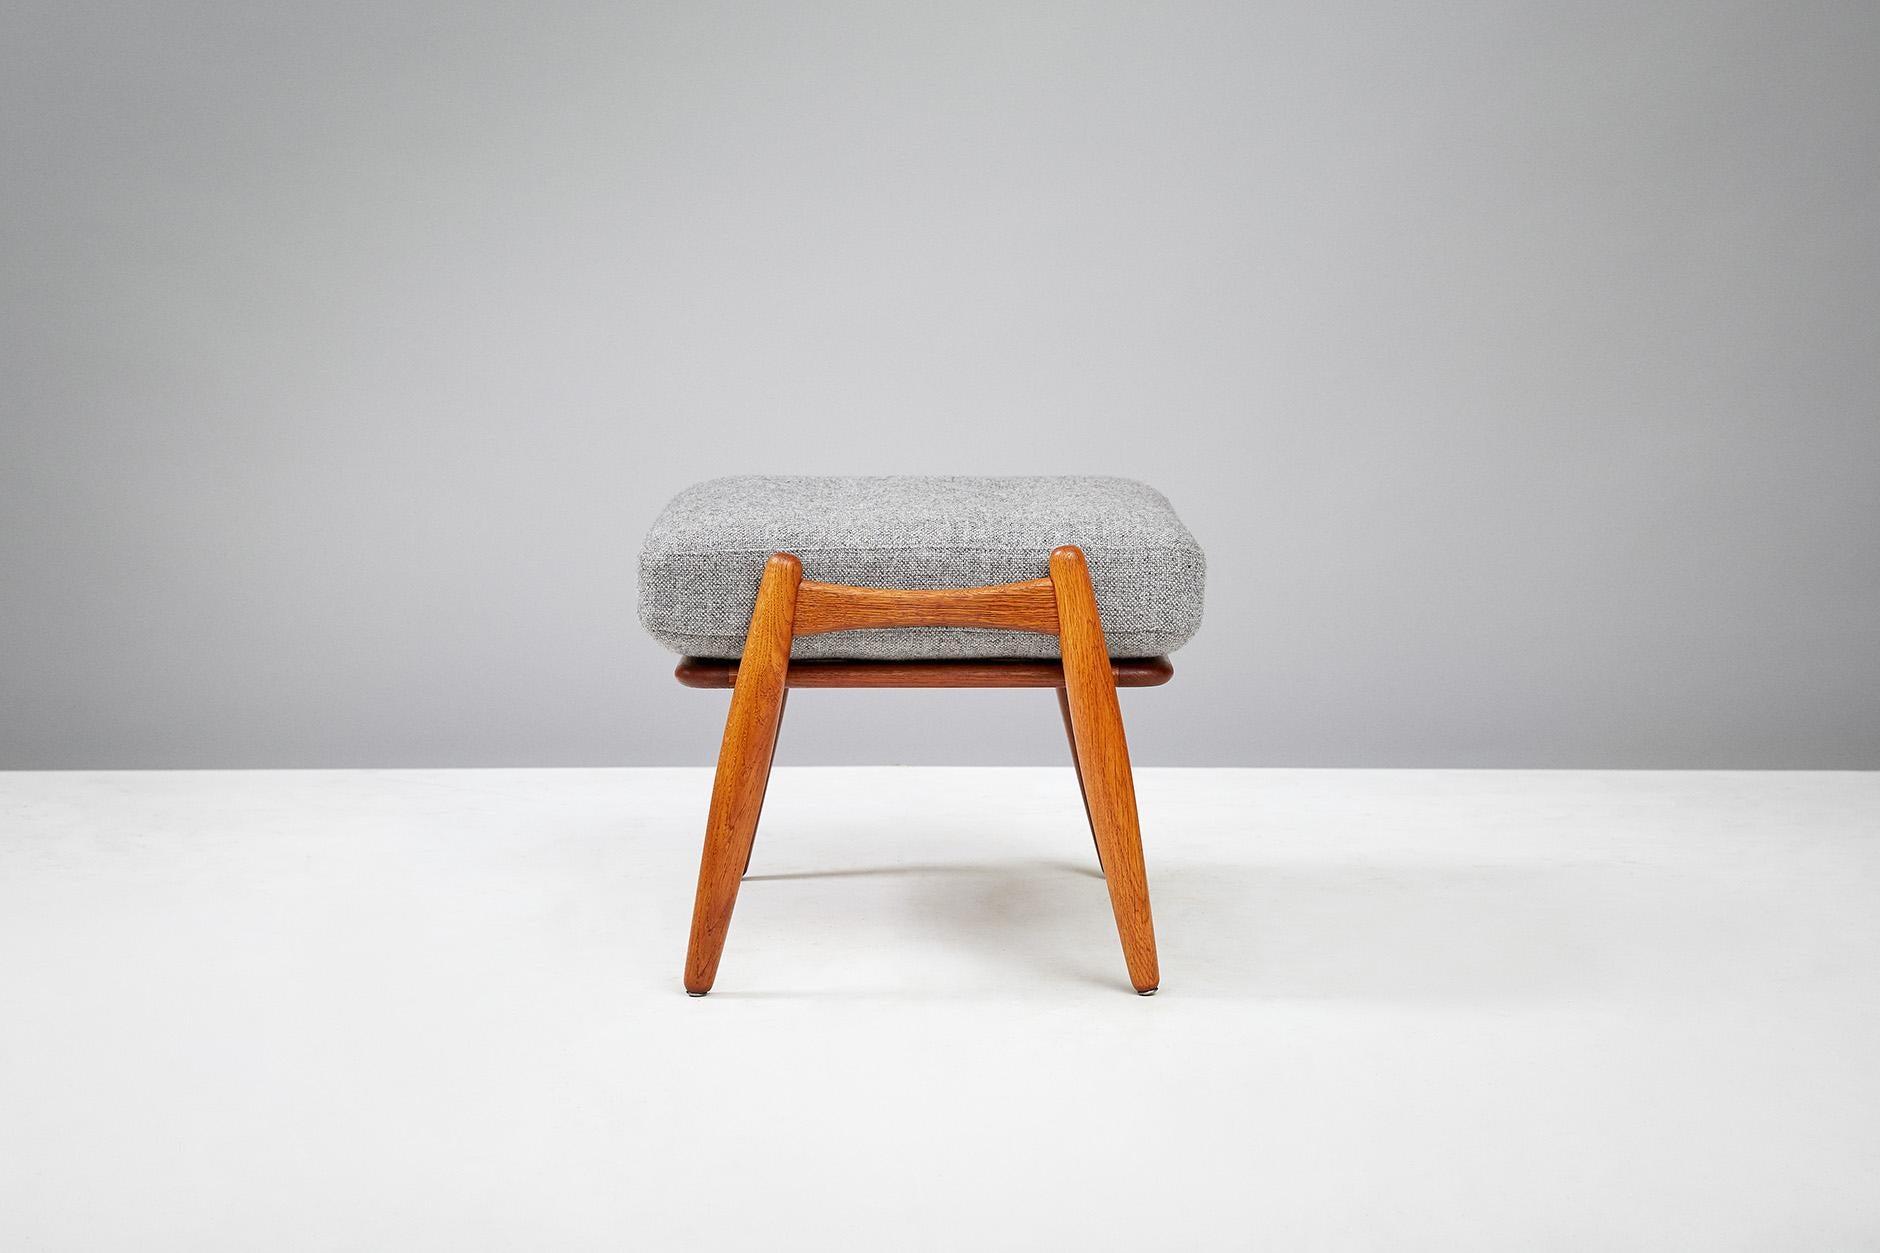 Hans J. Wegner
GE-240 cigar stool, circa 1950s.

Oak ottoman produced by Getama, Denmark to compliment the GE-240 and GE-260 lounge chairs. Original sprung cushion has been recovered in grey Kvadrat wool fabric.